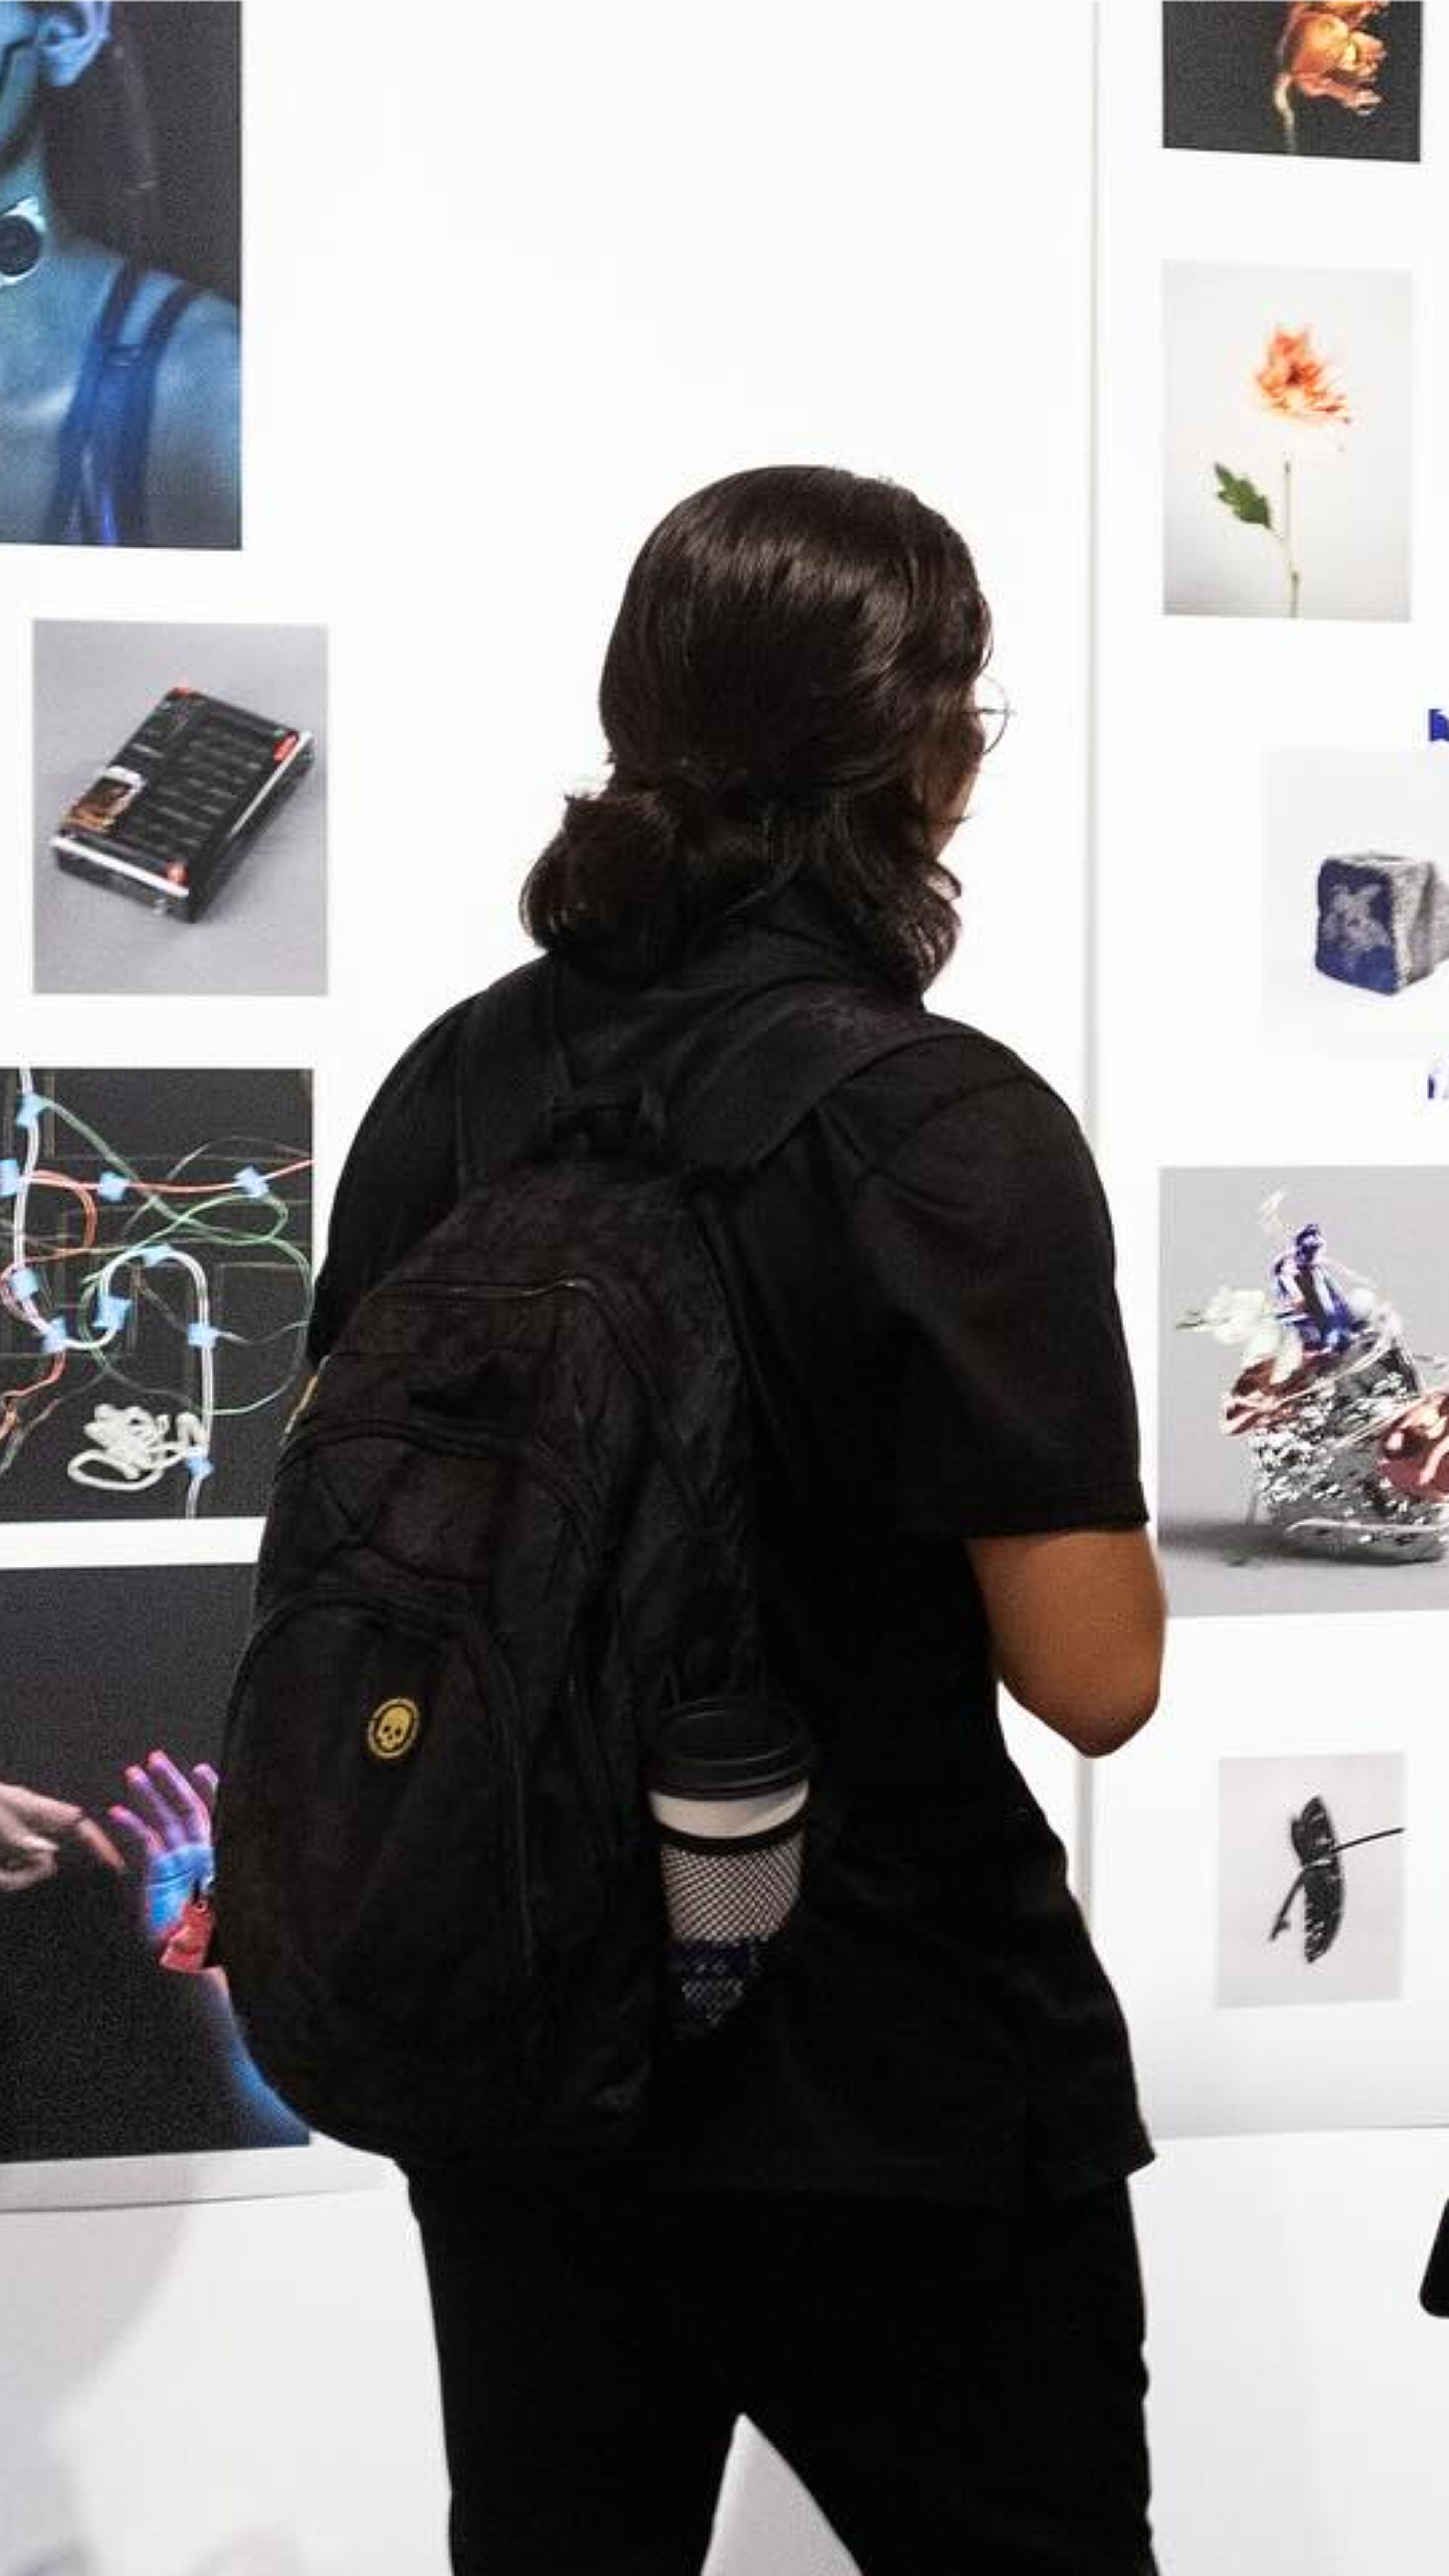 A person observing a wall of diverse photographs at a 2023 student photography exhibition.